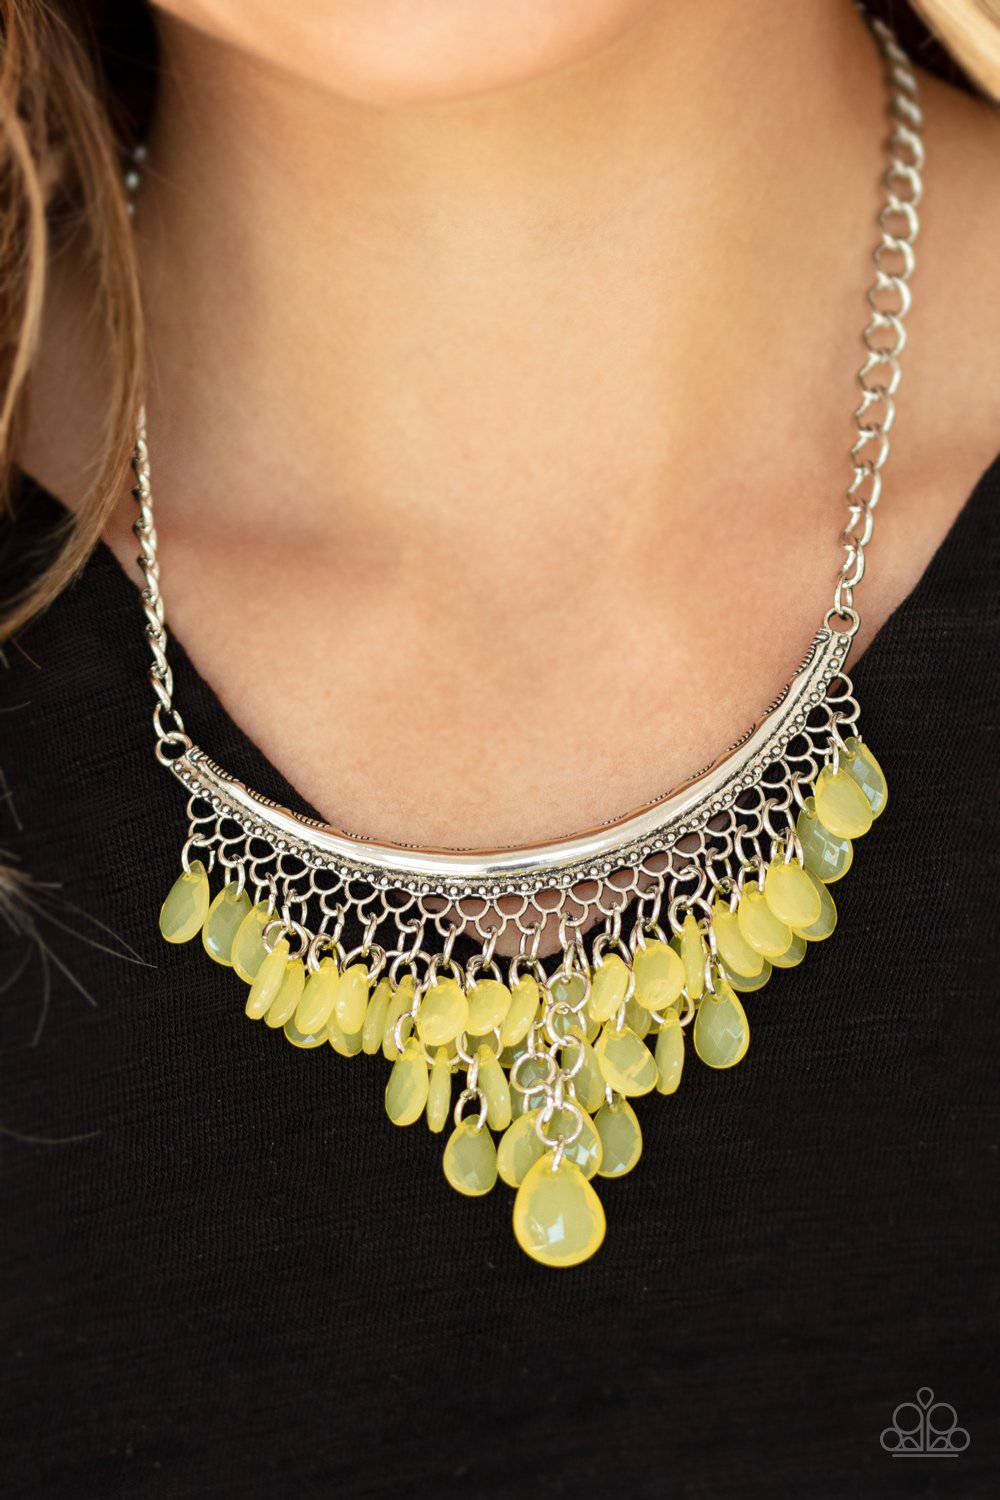 A359 - Rio Rainfall Yellow Necklace by Paparazzi Accessories on Fancy5Fashion.com